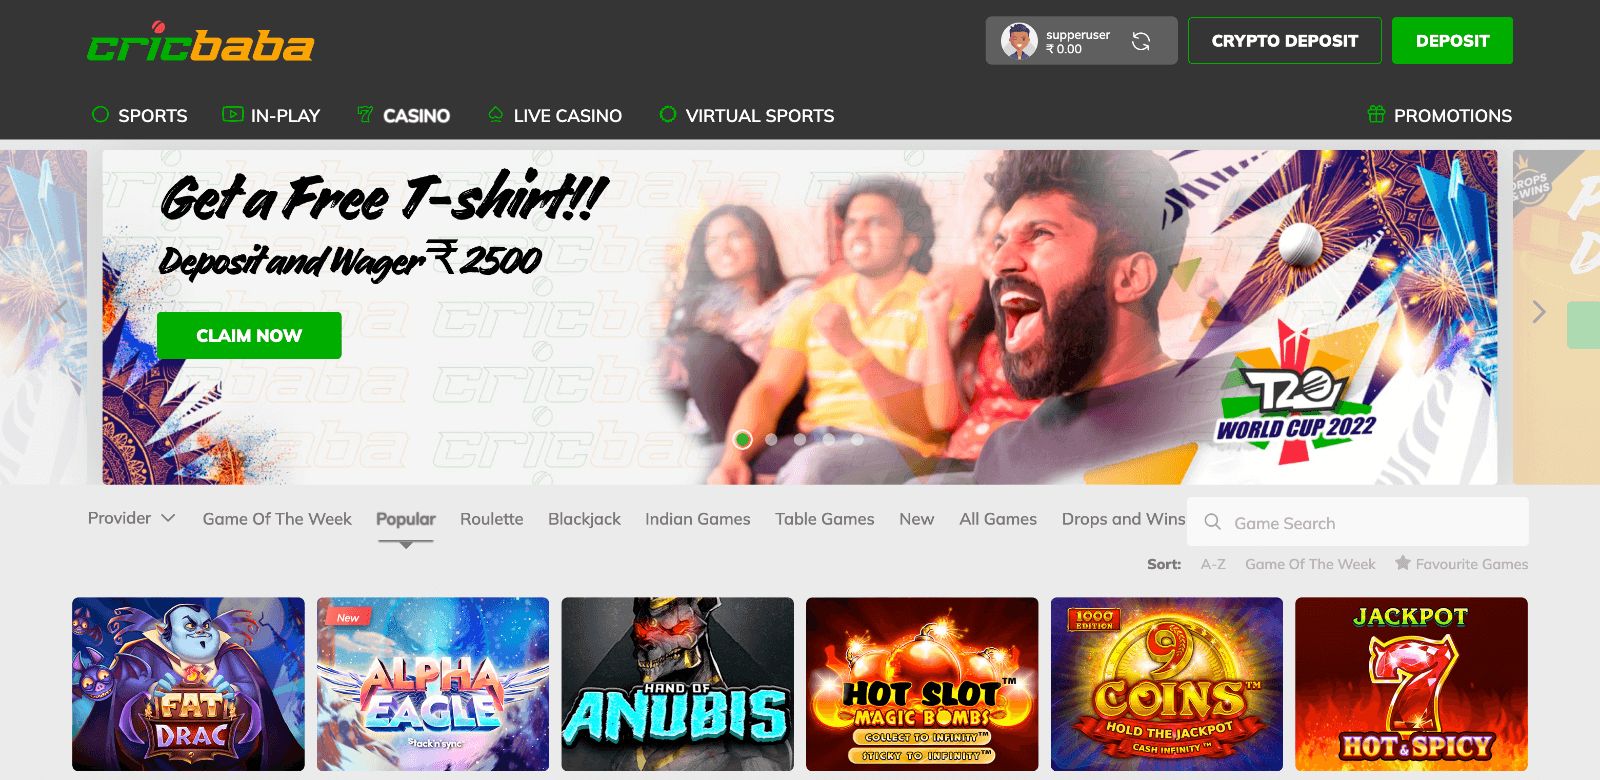 Online casino games at Cricbaba in India